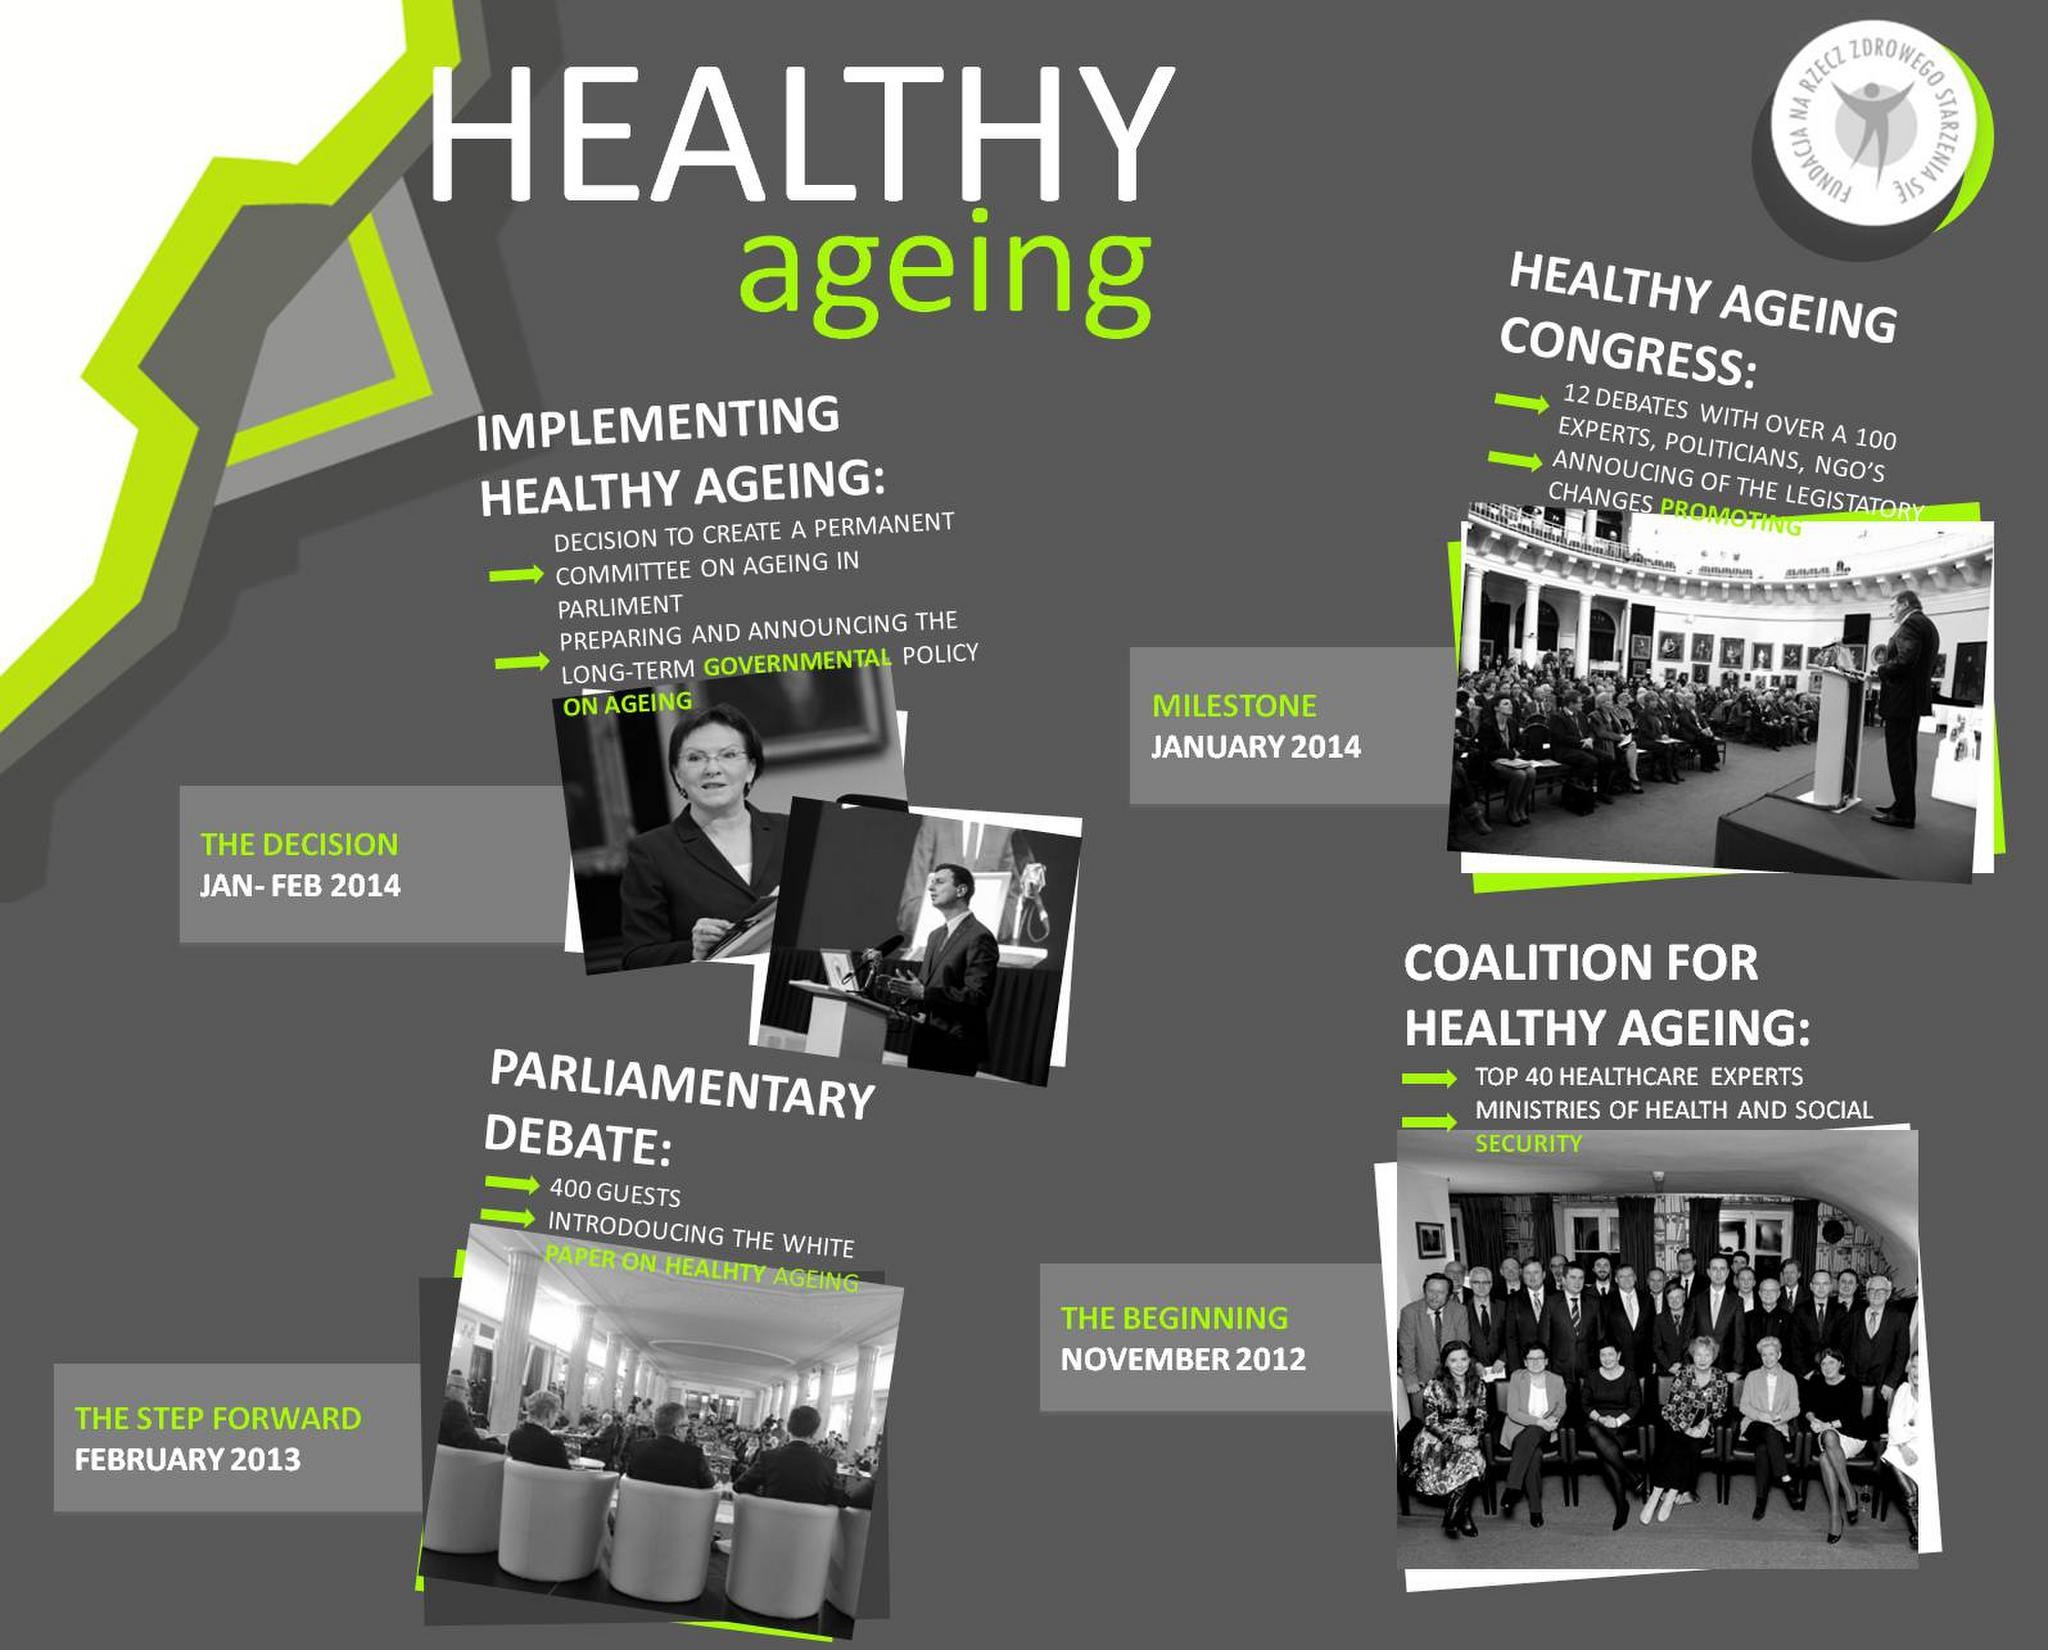 HEALTHY AGEING